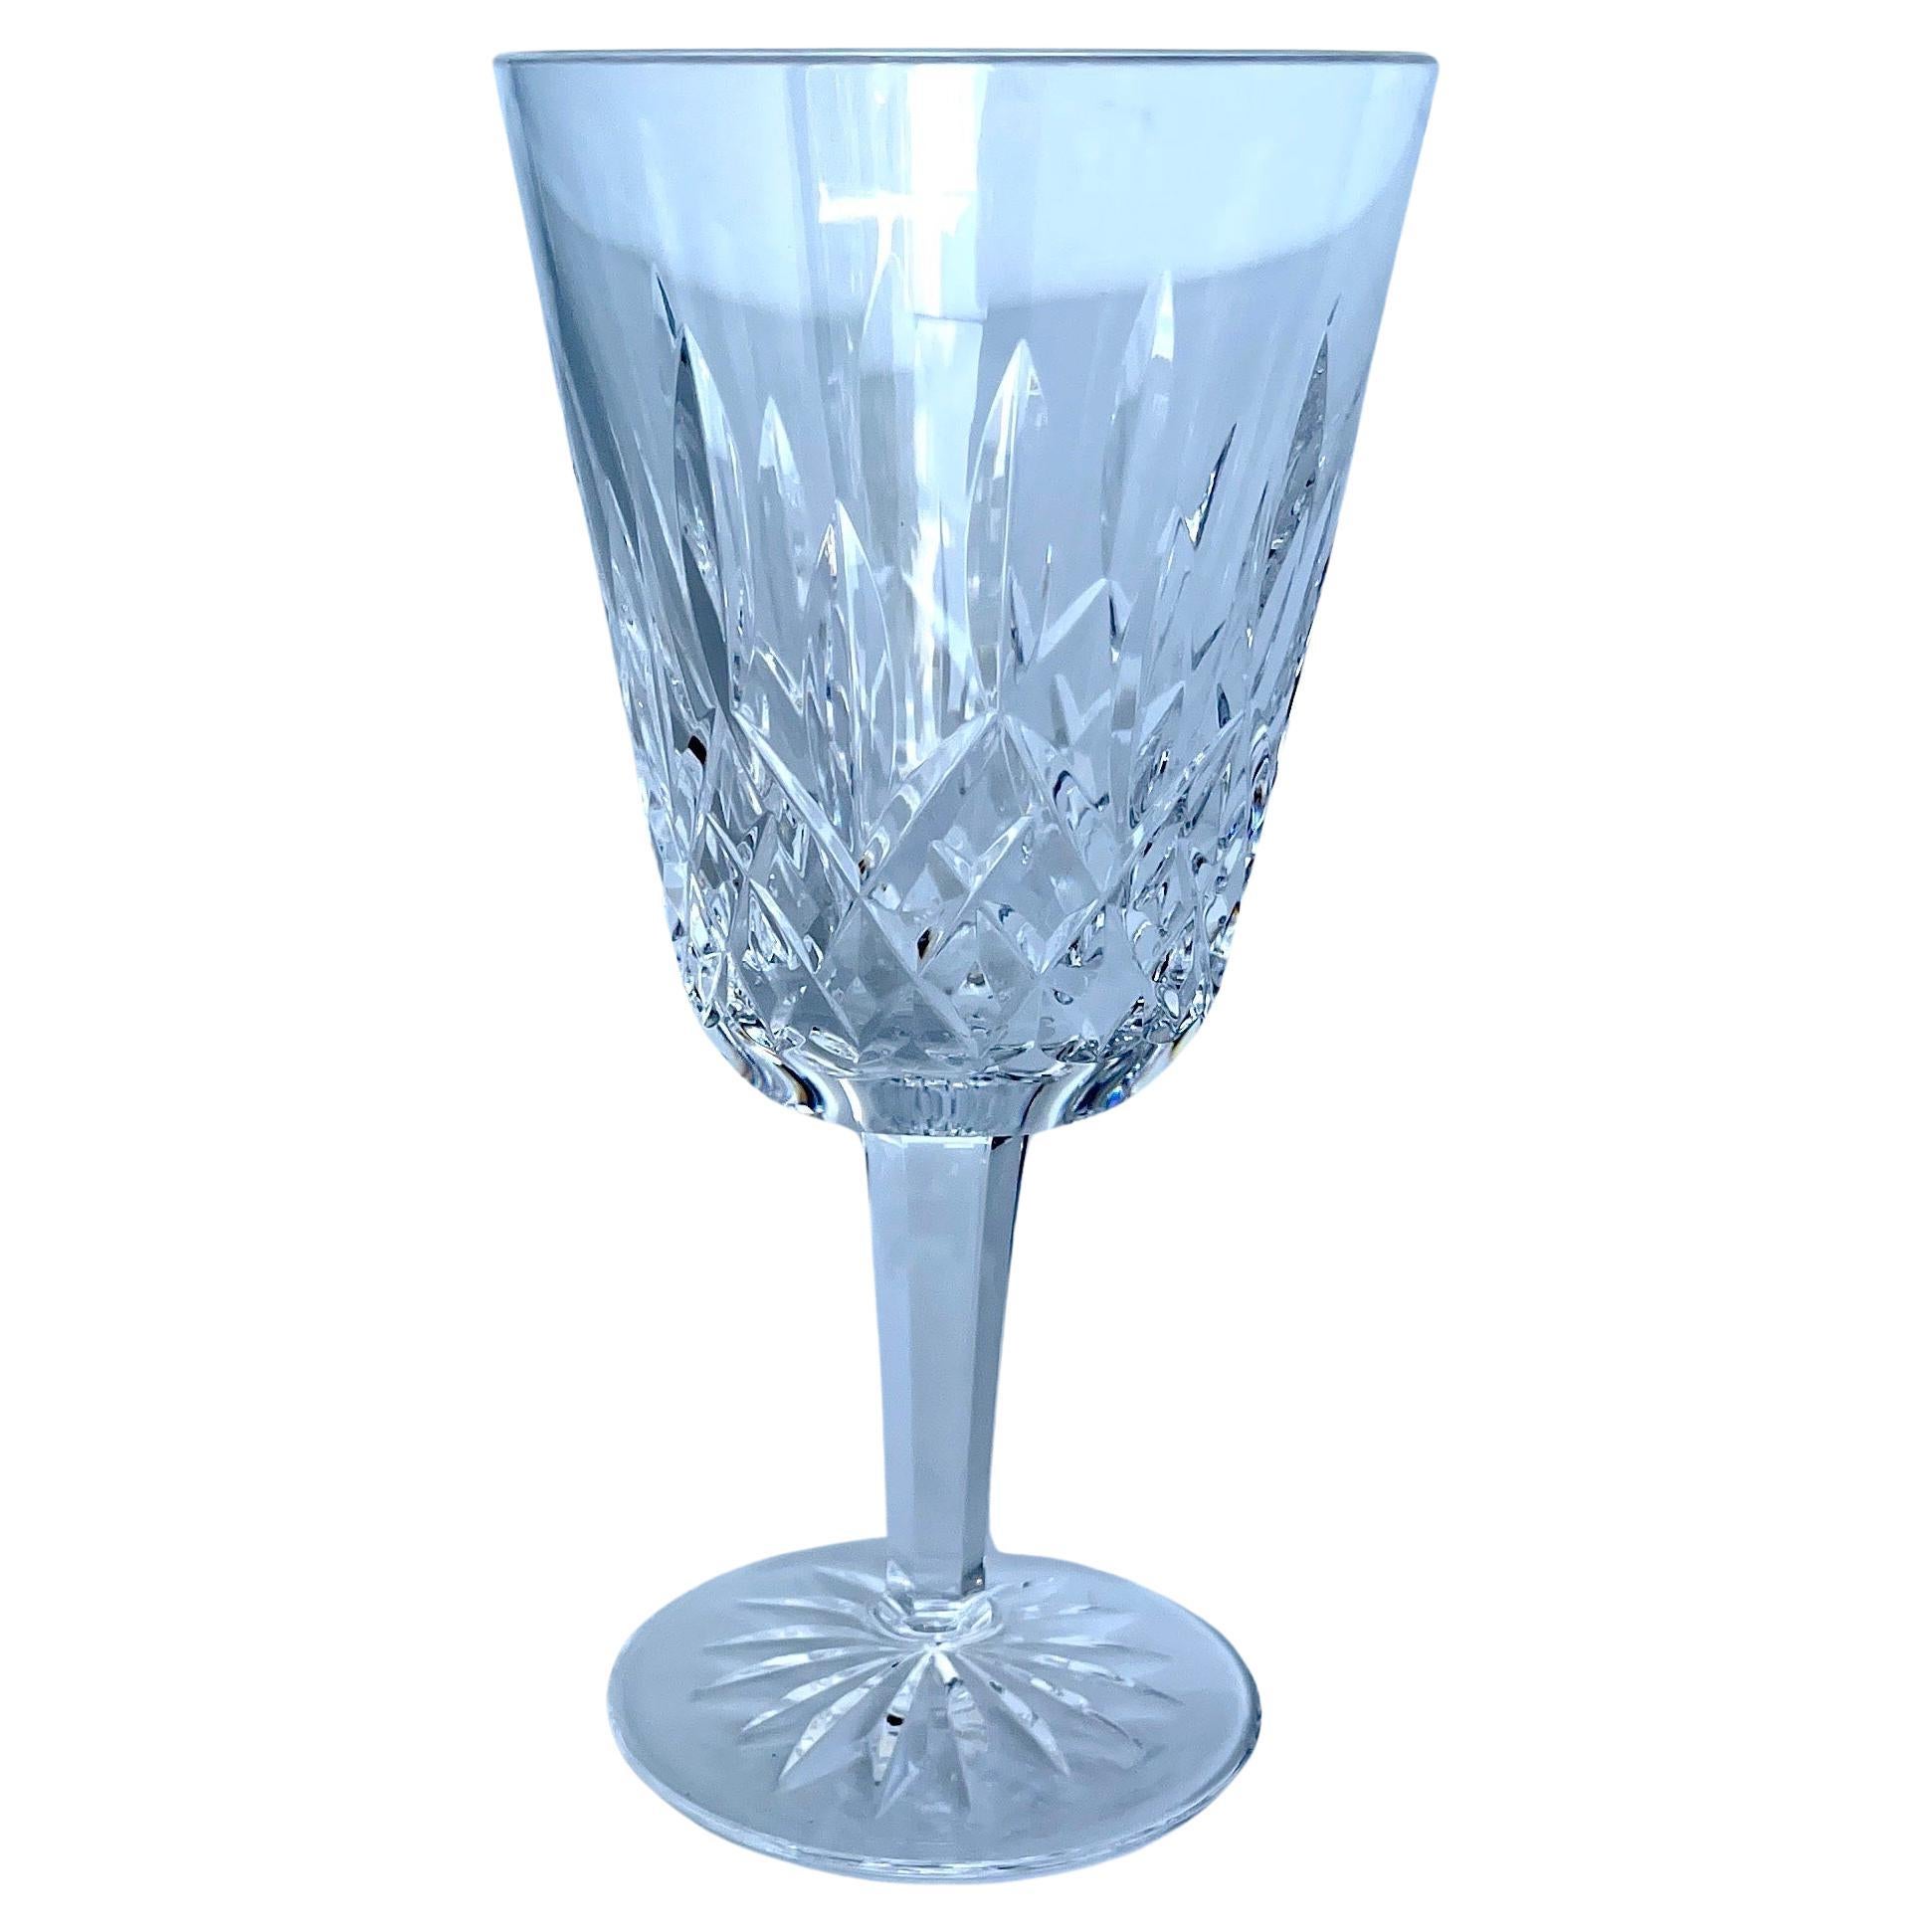 Set of 14 Vintage Lismore Waterford Crystal Goblet Water Wine Glasses, 1990s In Good Condition For Sale In Haddonfield, NJ